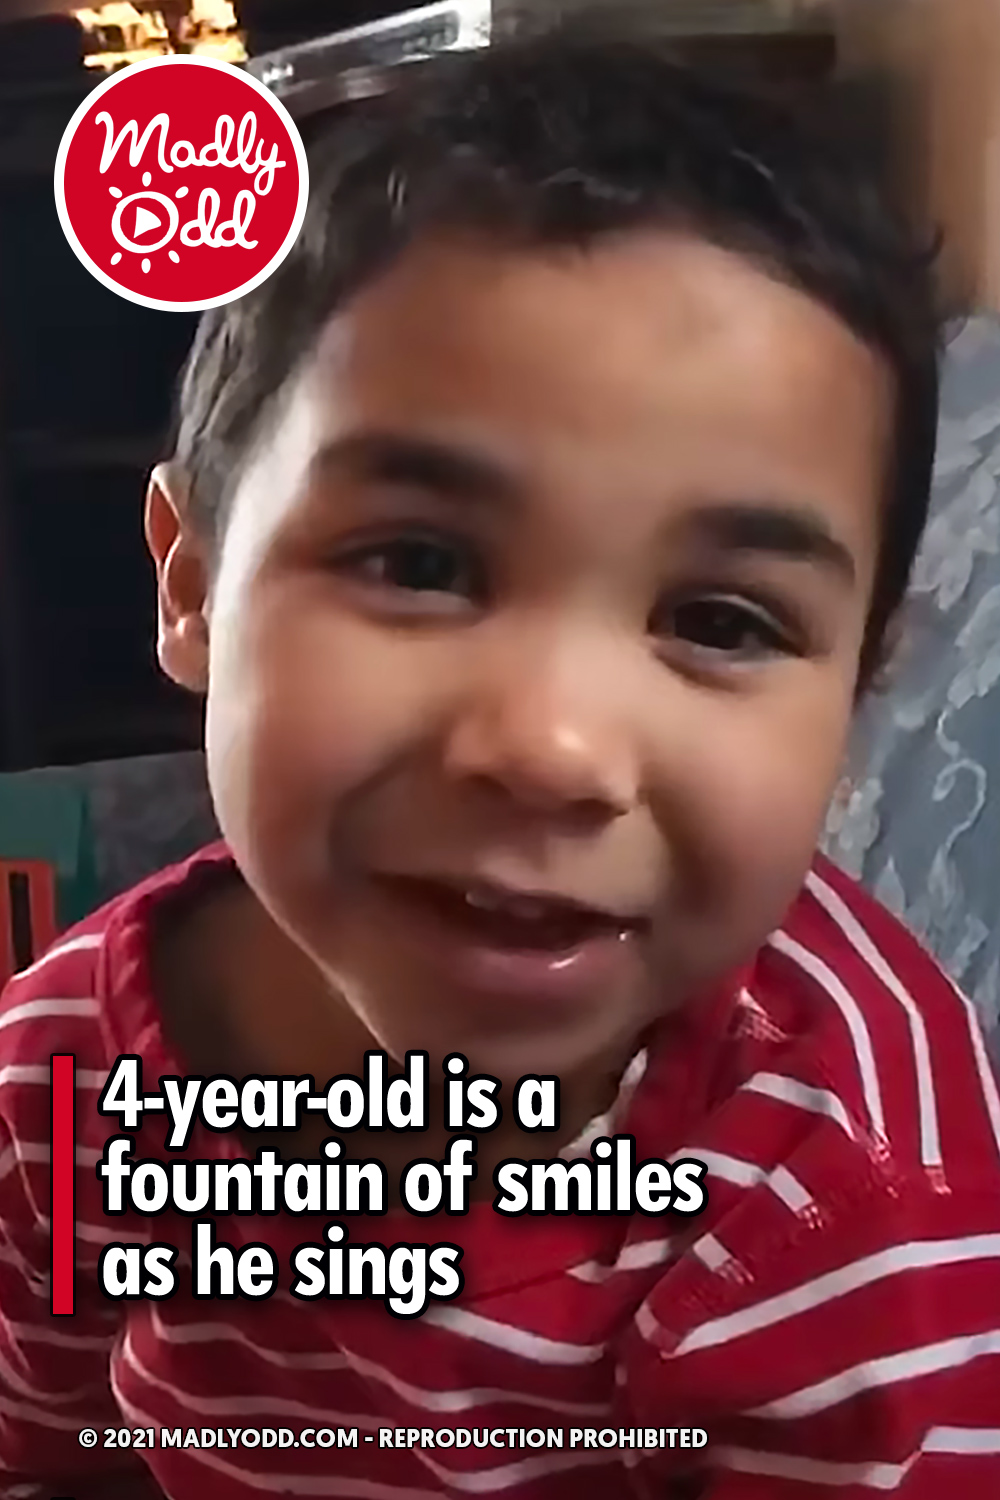 4-year-old is a fountain of smiles as he sings